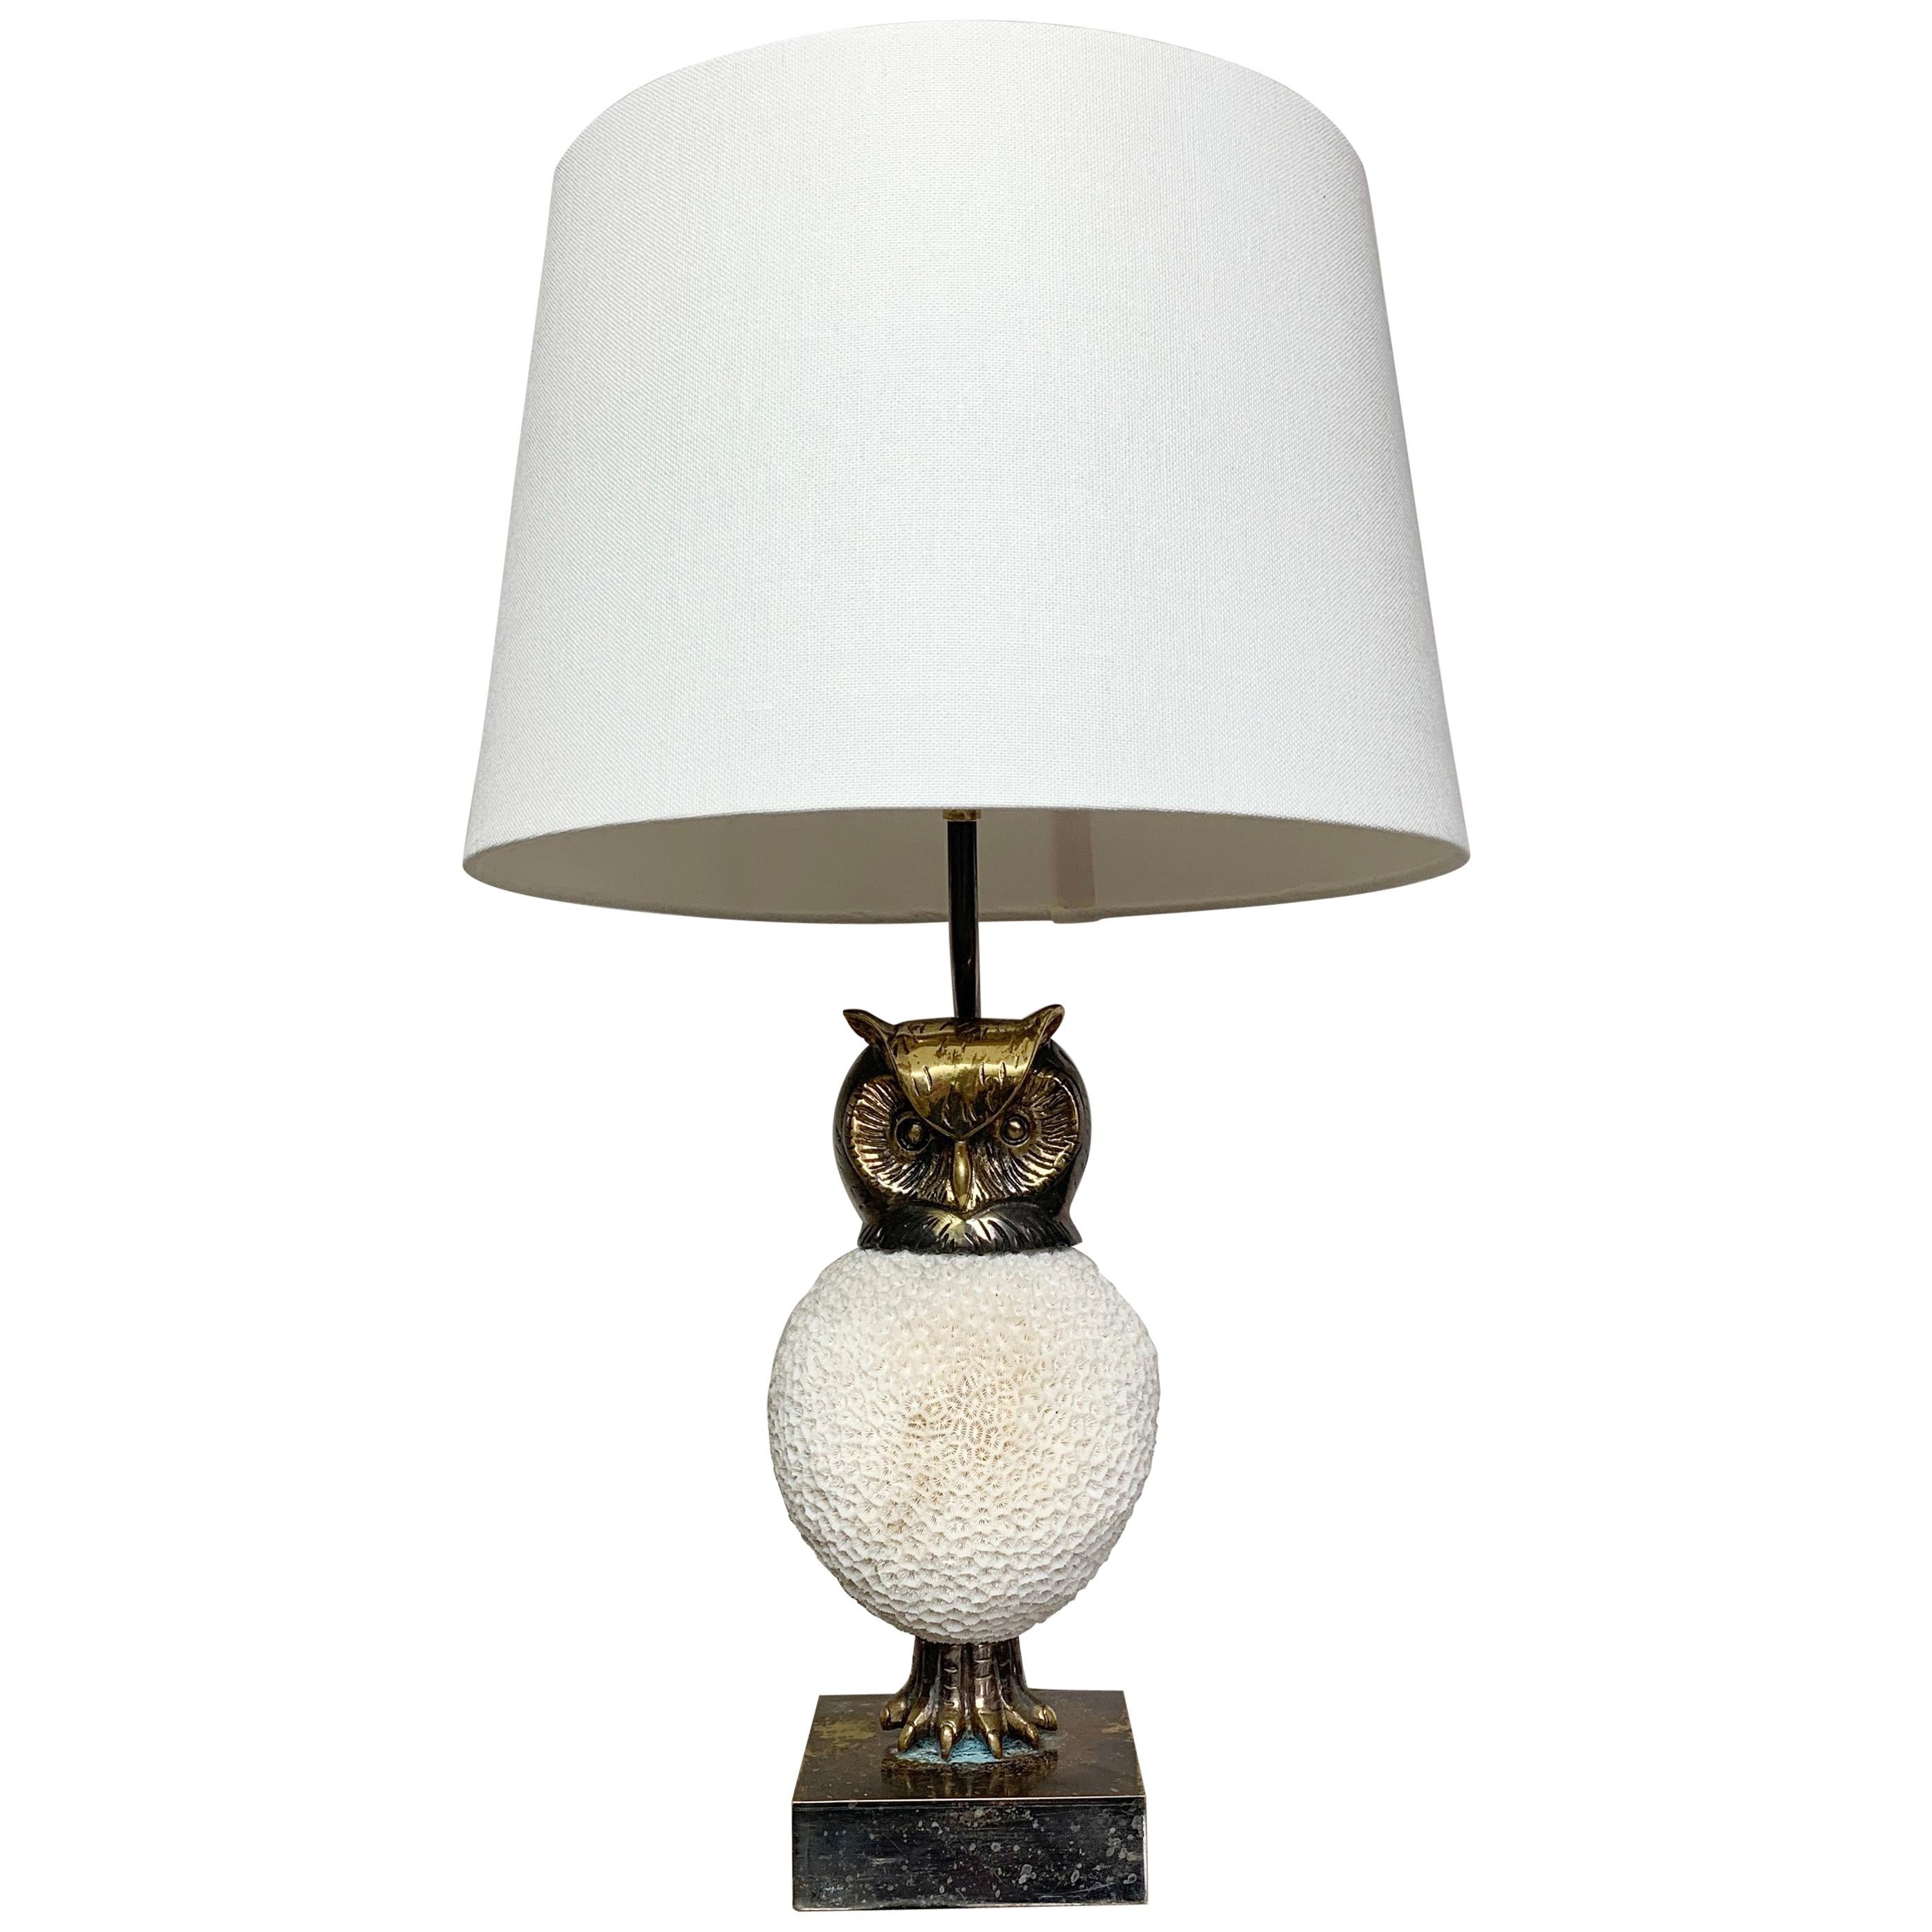 Exceptional, Willy Daro White Owl Table Lamp, 1970s